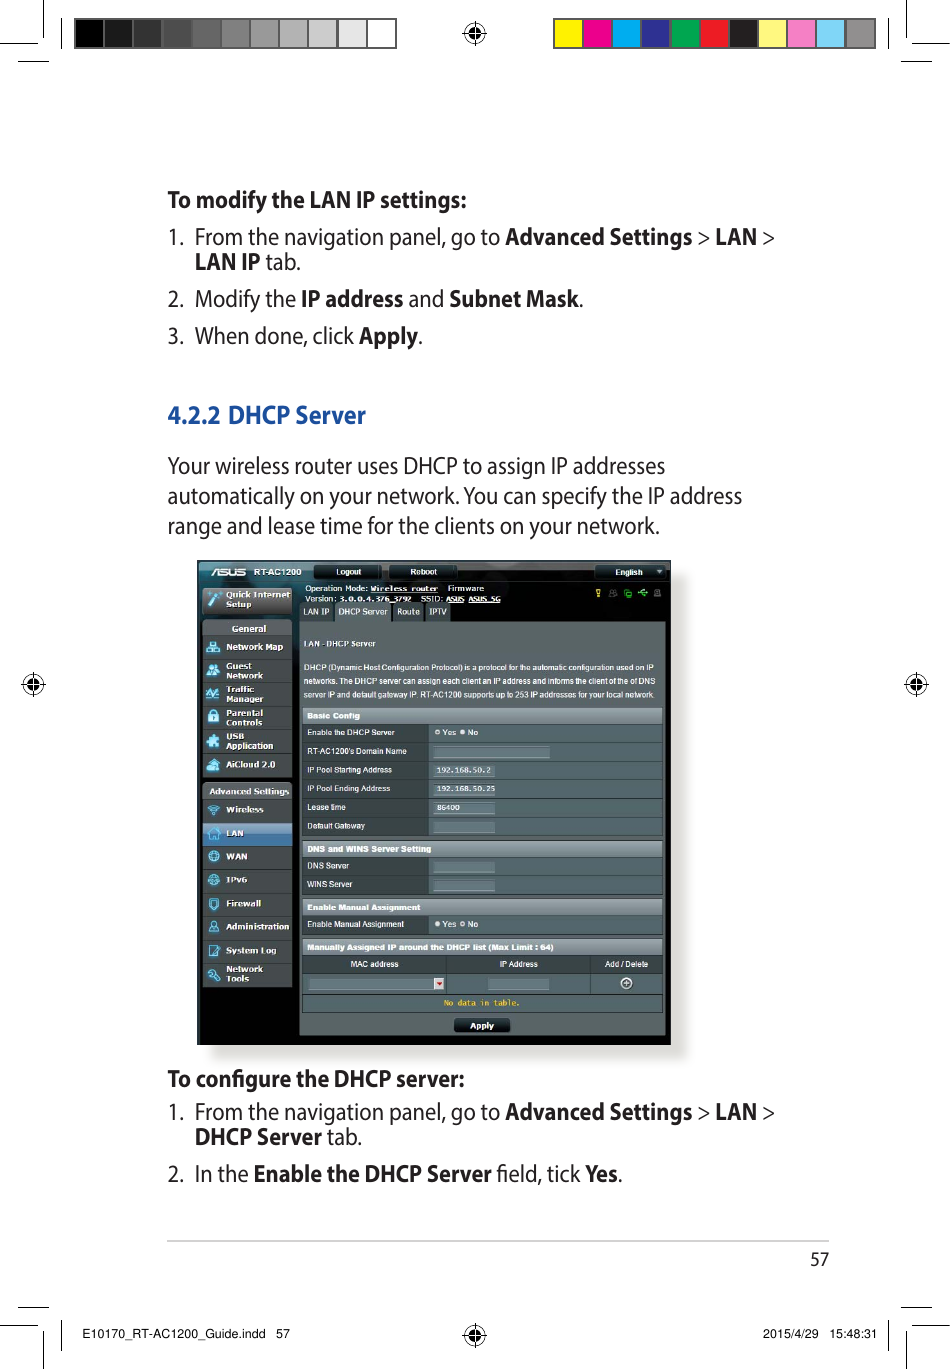 57To modify the LAN IP settings:1.  From the navigation panel, go to Advanced Settings &gt; LAN &gt; LAN IP tab.2.  Modify the IP address and Subnet Mask.3.  When done, click Apply.4.2.2 DHCP ServerYour wireless router uses DHCP to assign IP addresses automatically on your network. You can specify the IP address range and lease time for the clients on your network.To congure the DHCP server:1.  From the navigation panel, go to Advanced Settings &gt; LAN &gt; DHCP Server tab.2.  In the Enable the DHCP Server eld, tick Yes .E10170_RT-AC1200_Guide.indd   57 2015/4/29   15:48:31